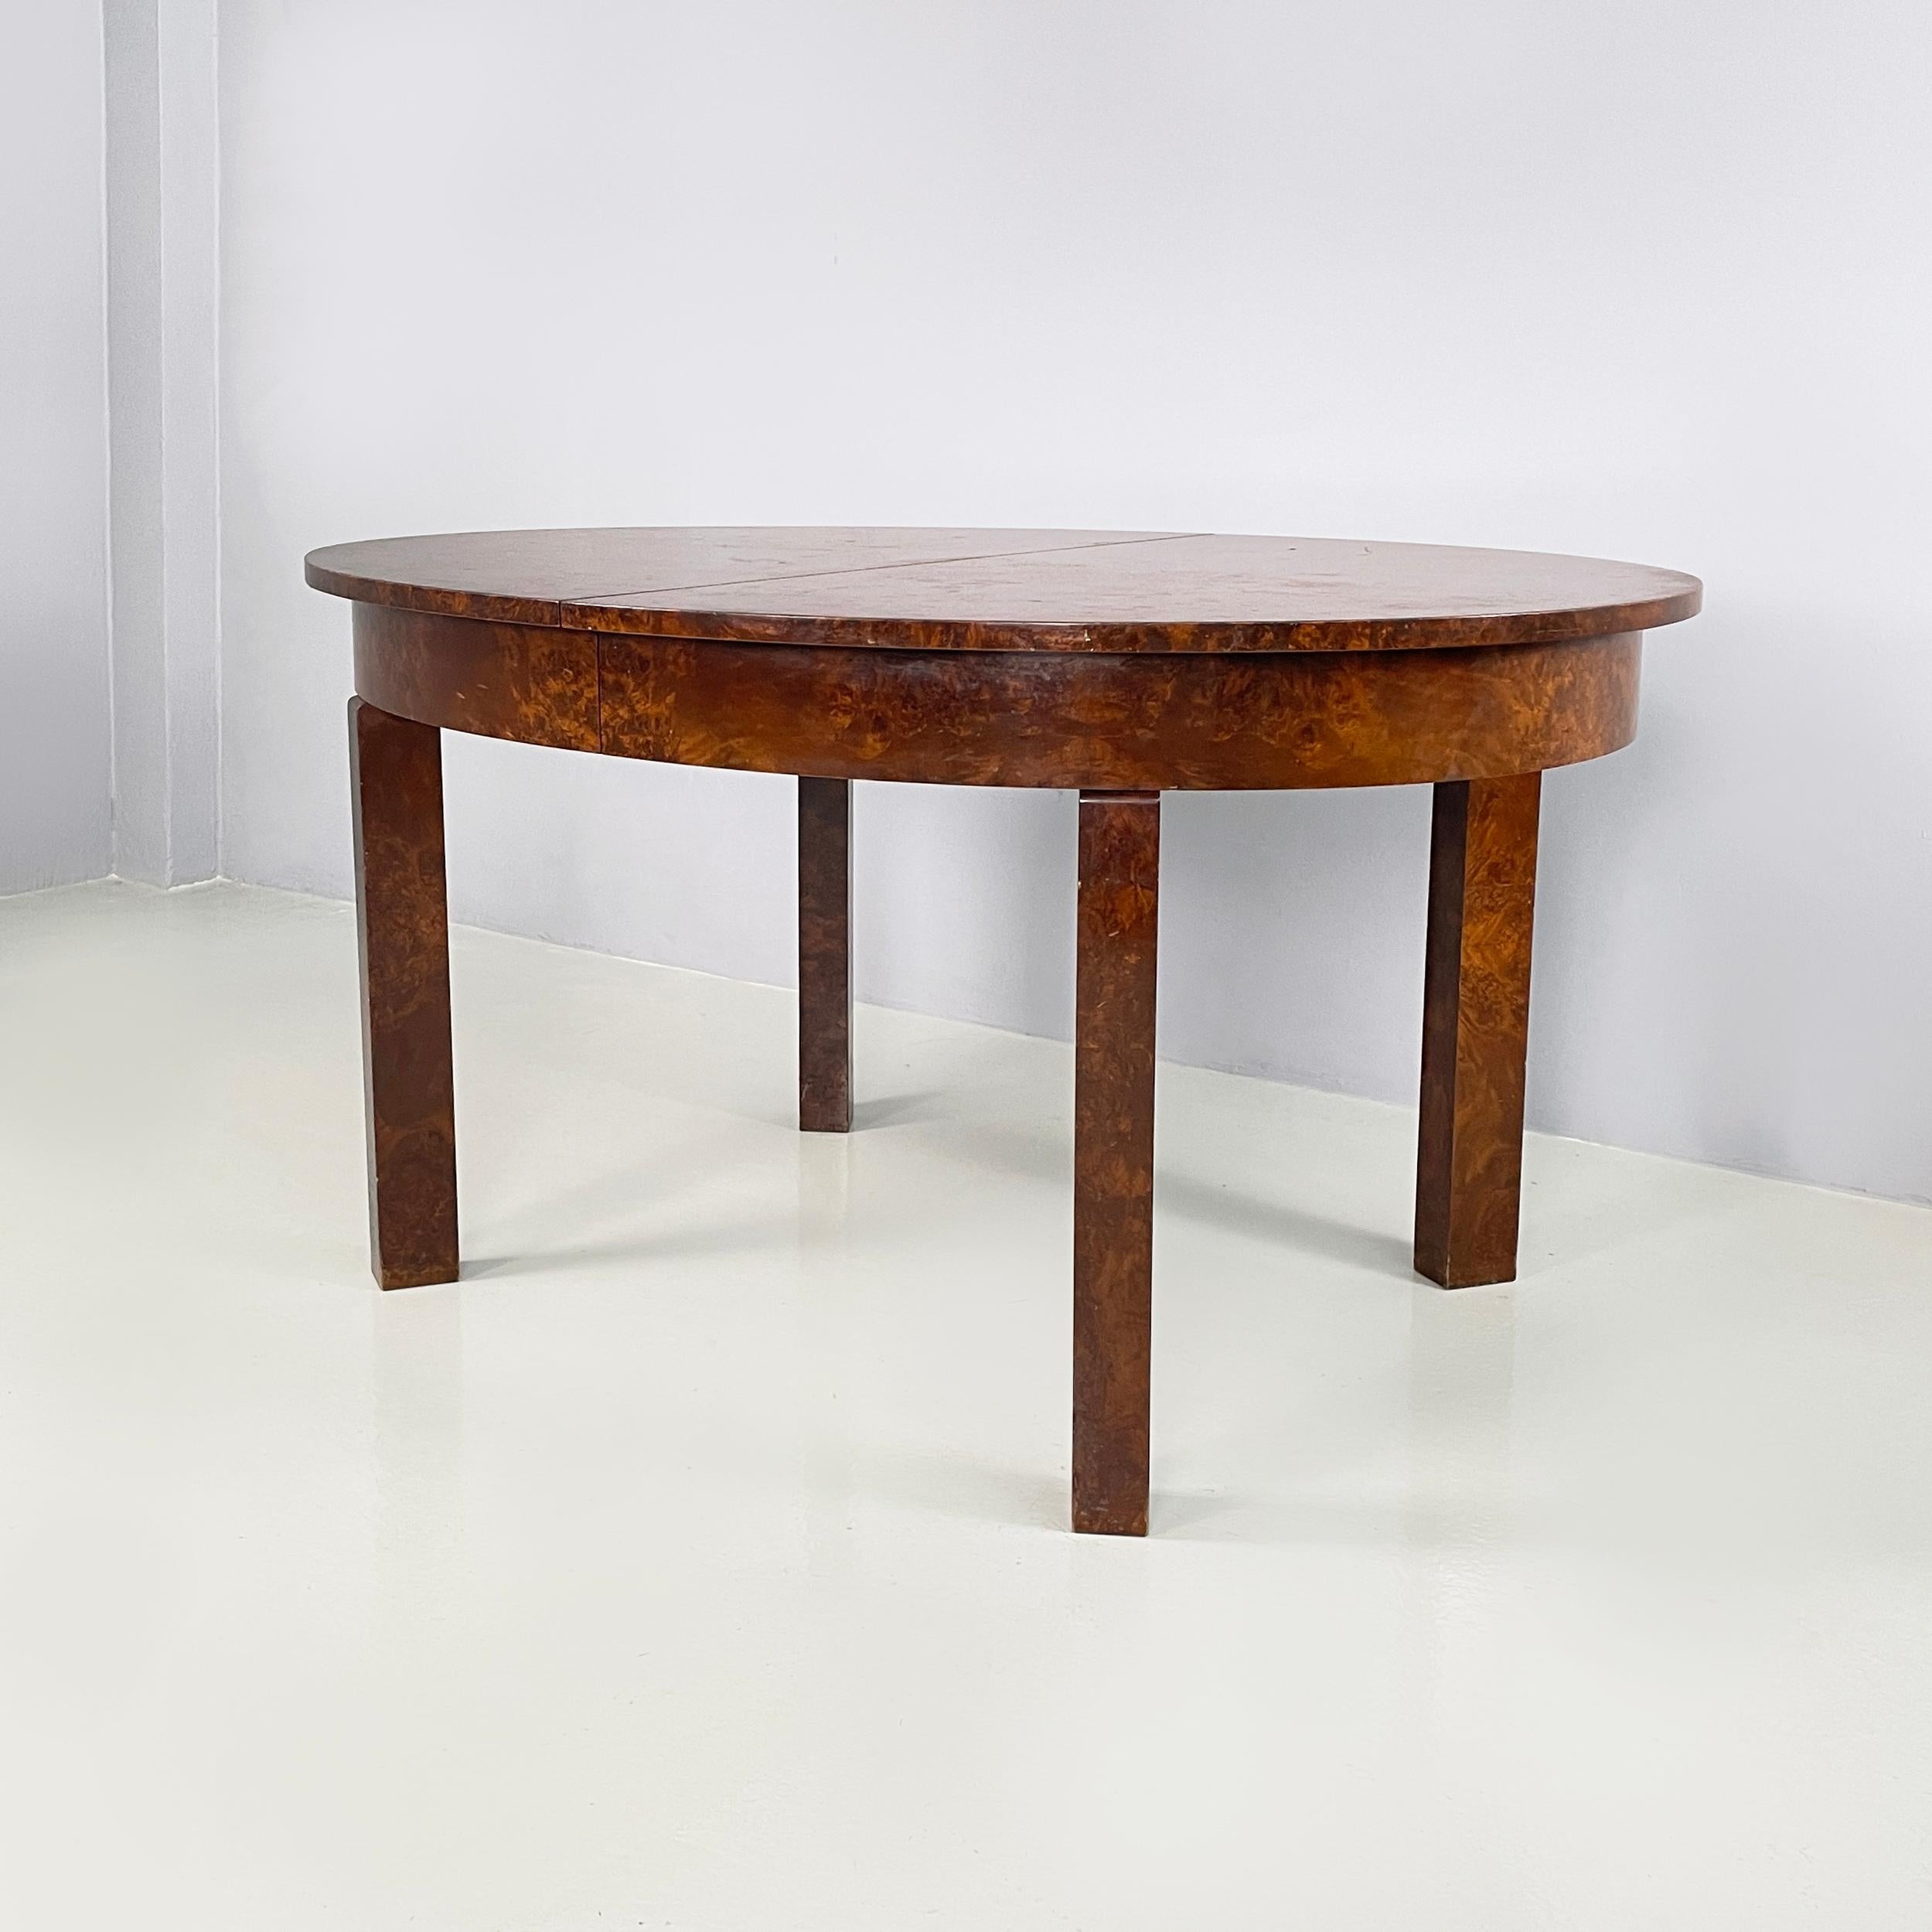 Hungarian art deco Oval dining table in wood, 1930s
Dining table with oval top with slight overhang, entirely in dark wood. The legs have a rectangular section. From Art deco period.ì
1930s. Of Hungarian origin.
Good conditions. The top has several